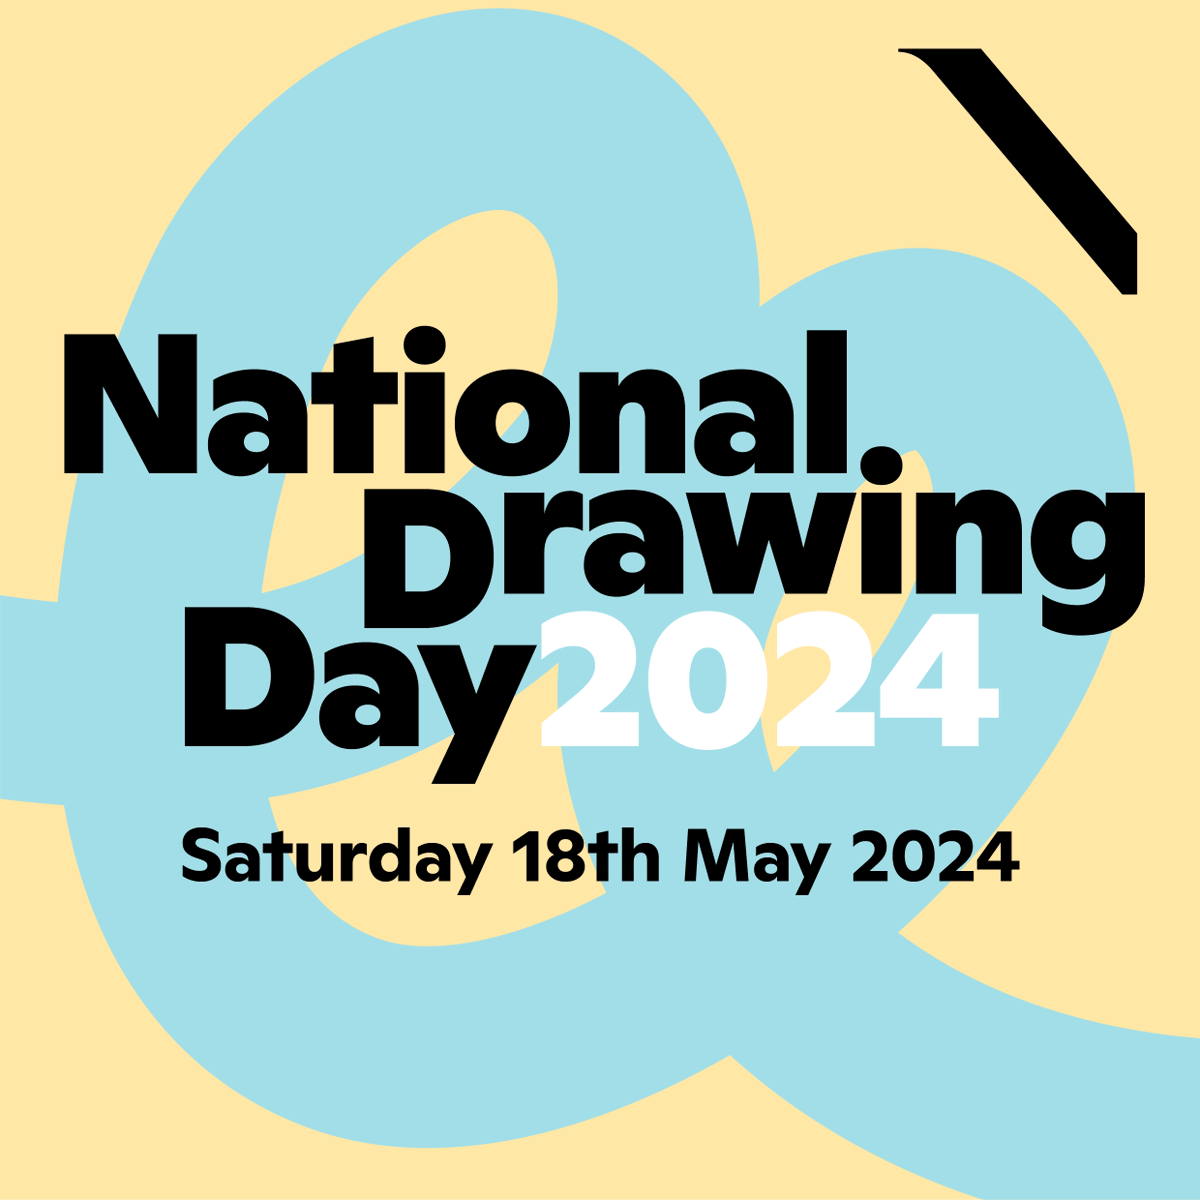 National Drawing Day 2024! 🖍️

What is happening in the Hunt Museum for National Drawing Day? 'A Bug's Life' Themed Drawing Workshop at 11am from 12:30 pm, suitable for children Aged 7 - 12 years and it's free! 🐝 

#NationalDrawingDay  #DrawingWorkshop

@NGIreland